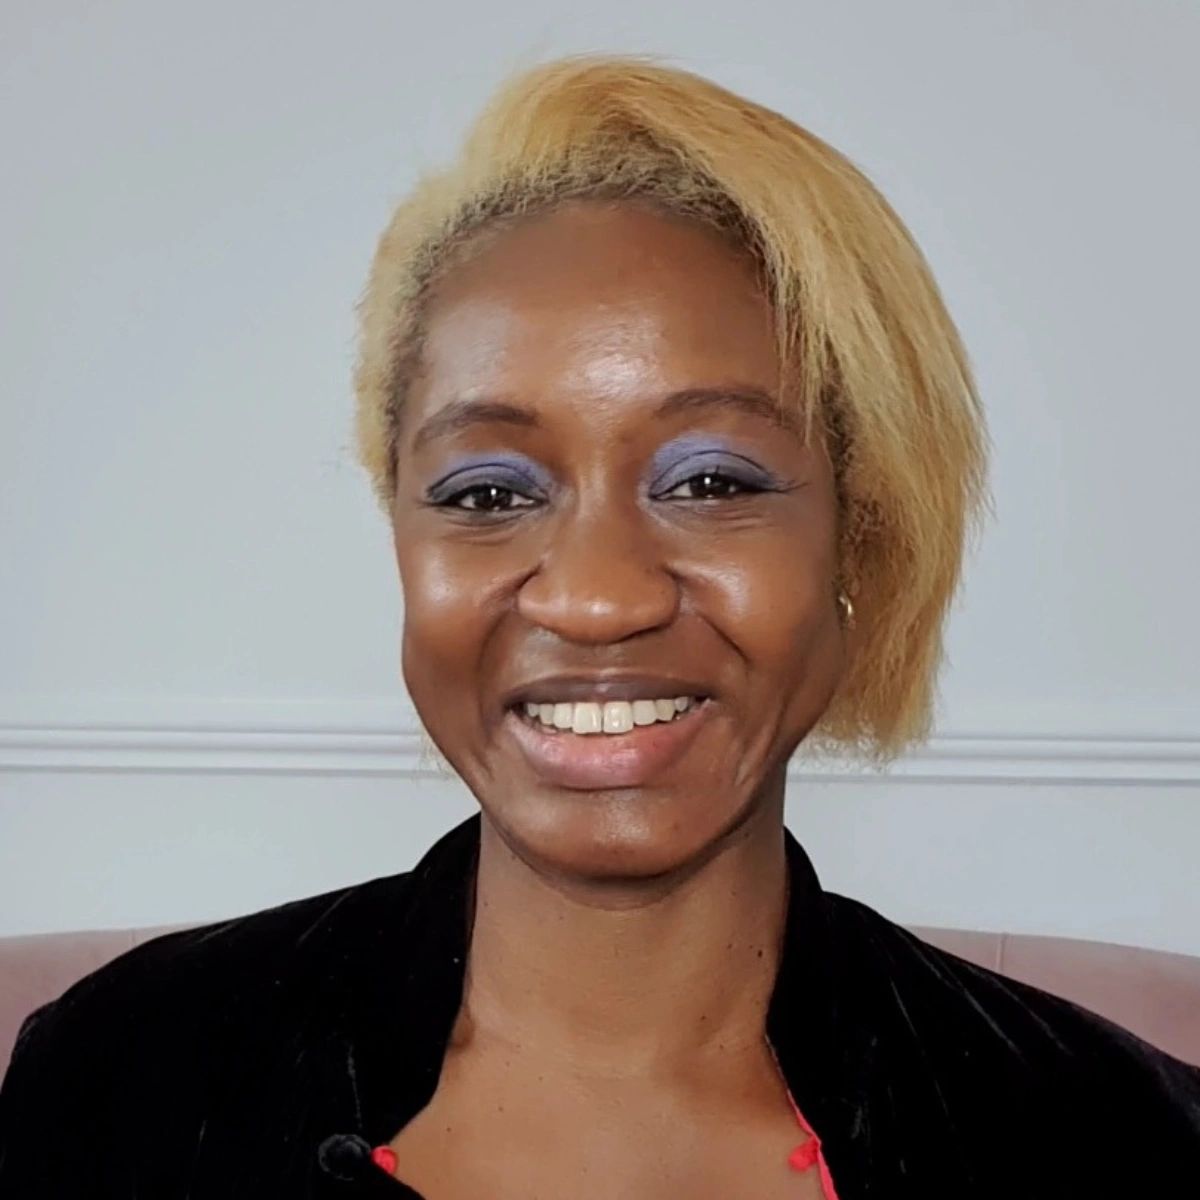 Black woman with blond hair smiles at camera